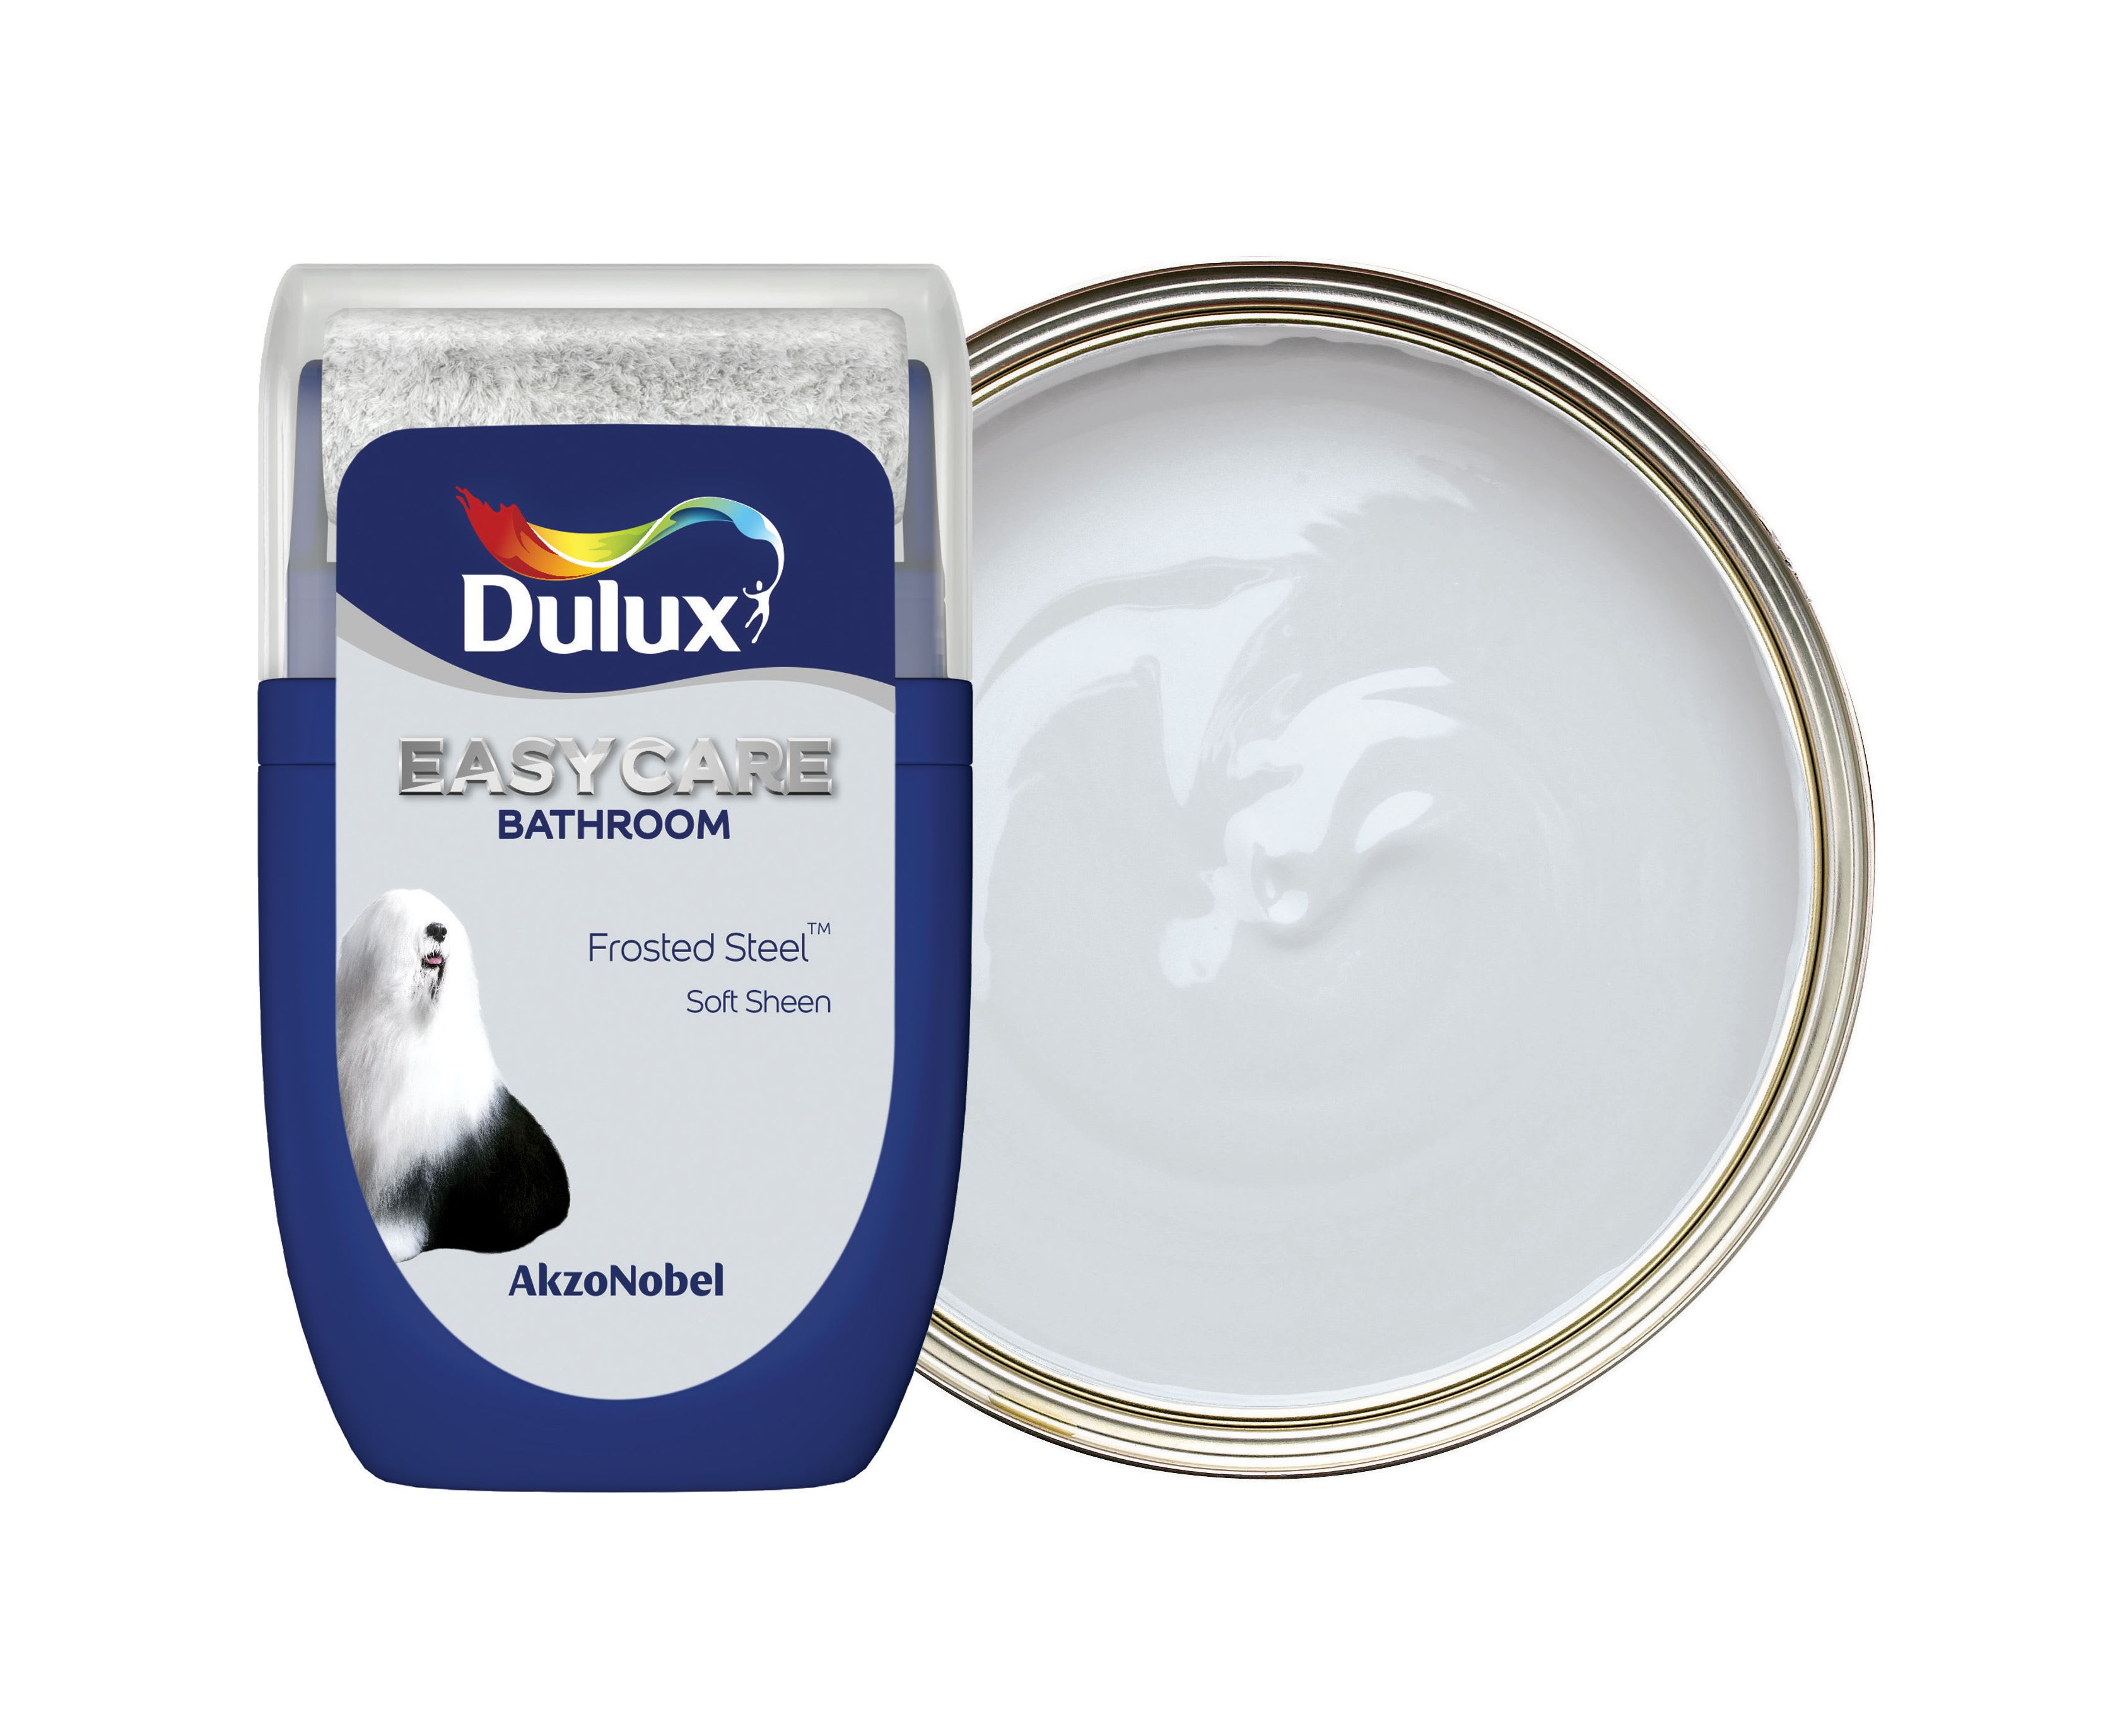 Dulux Easycare Bathroom Paint - Frosted Steel Tester